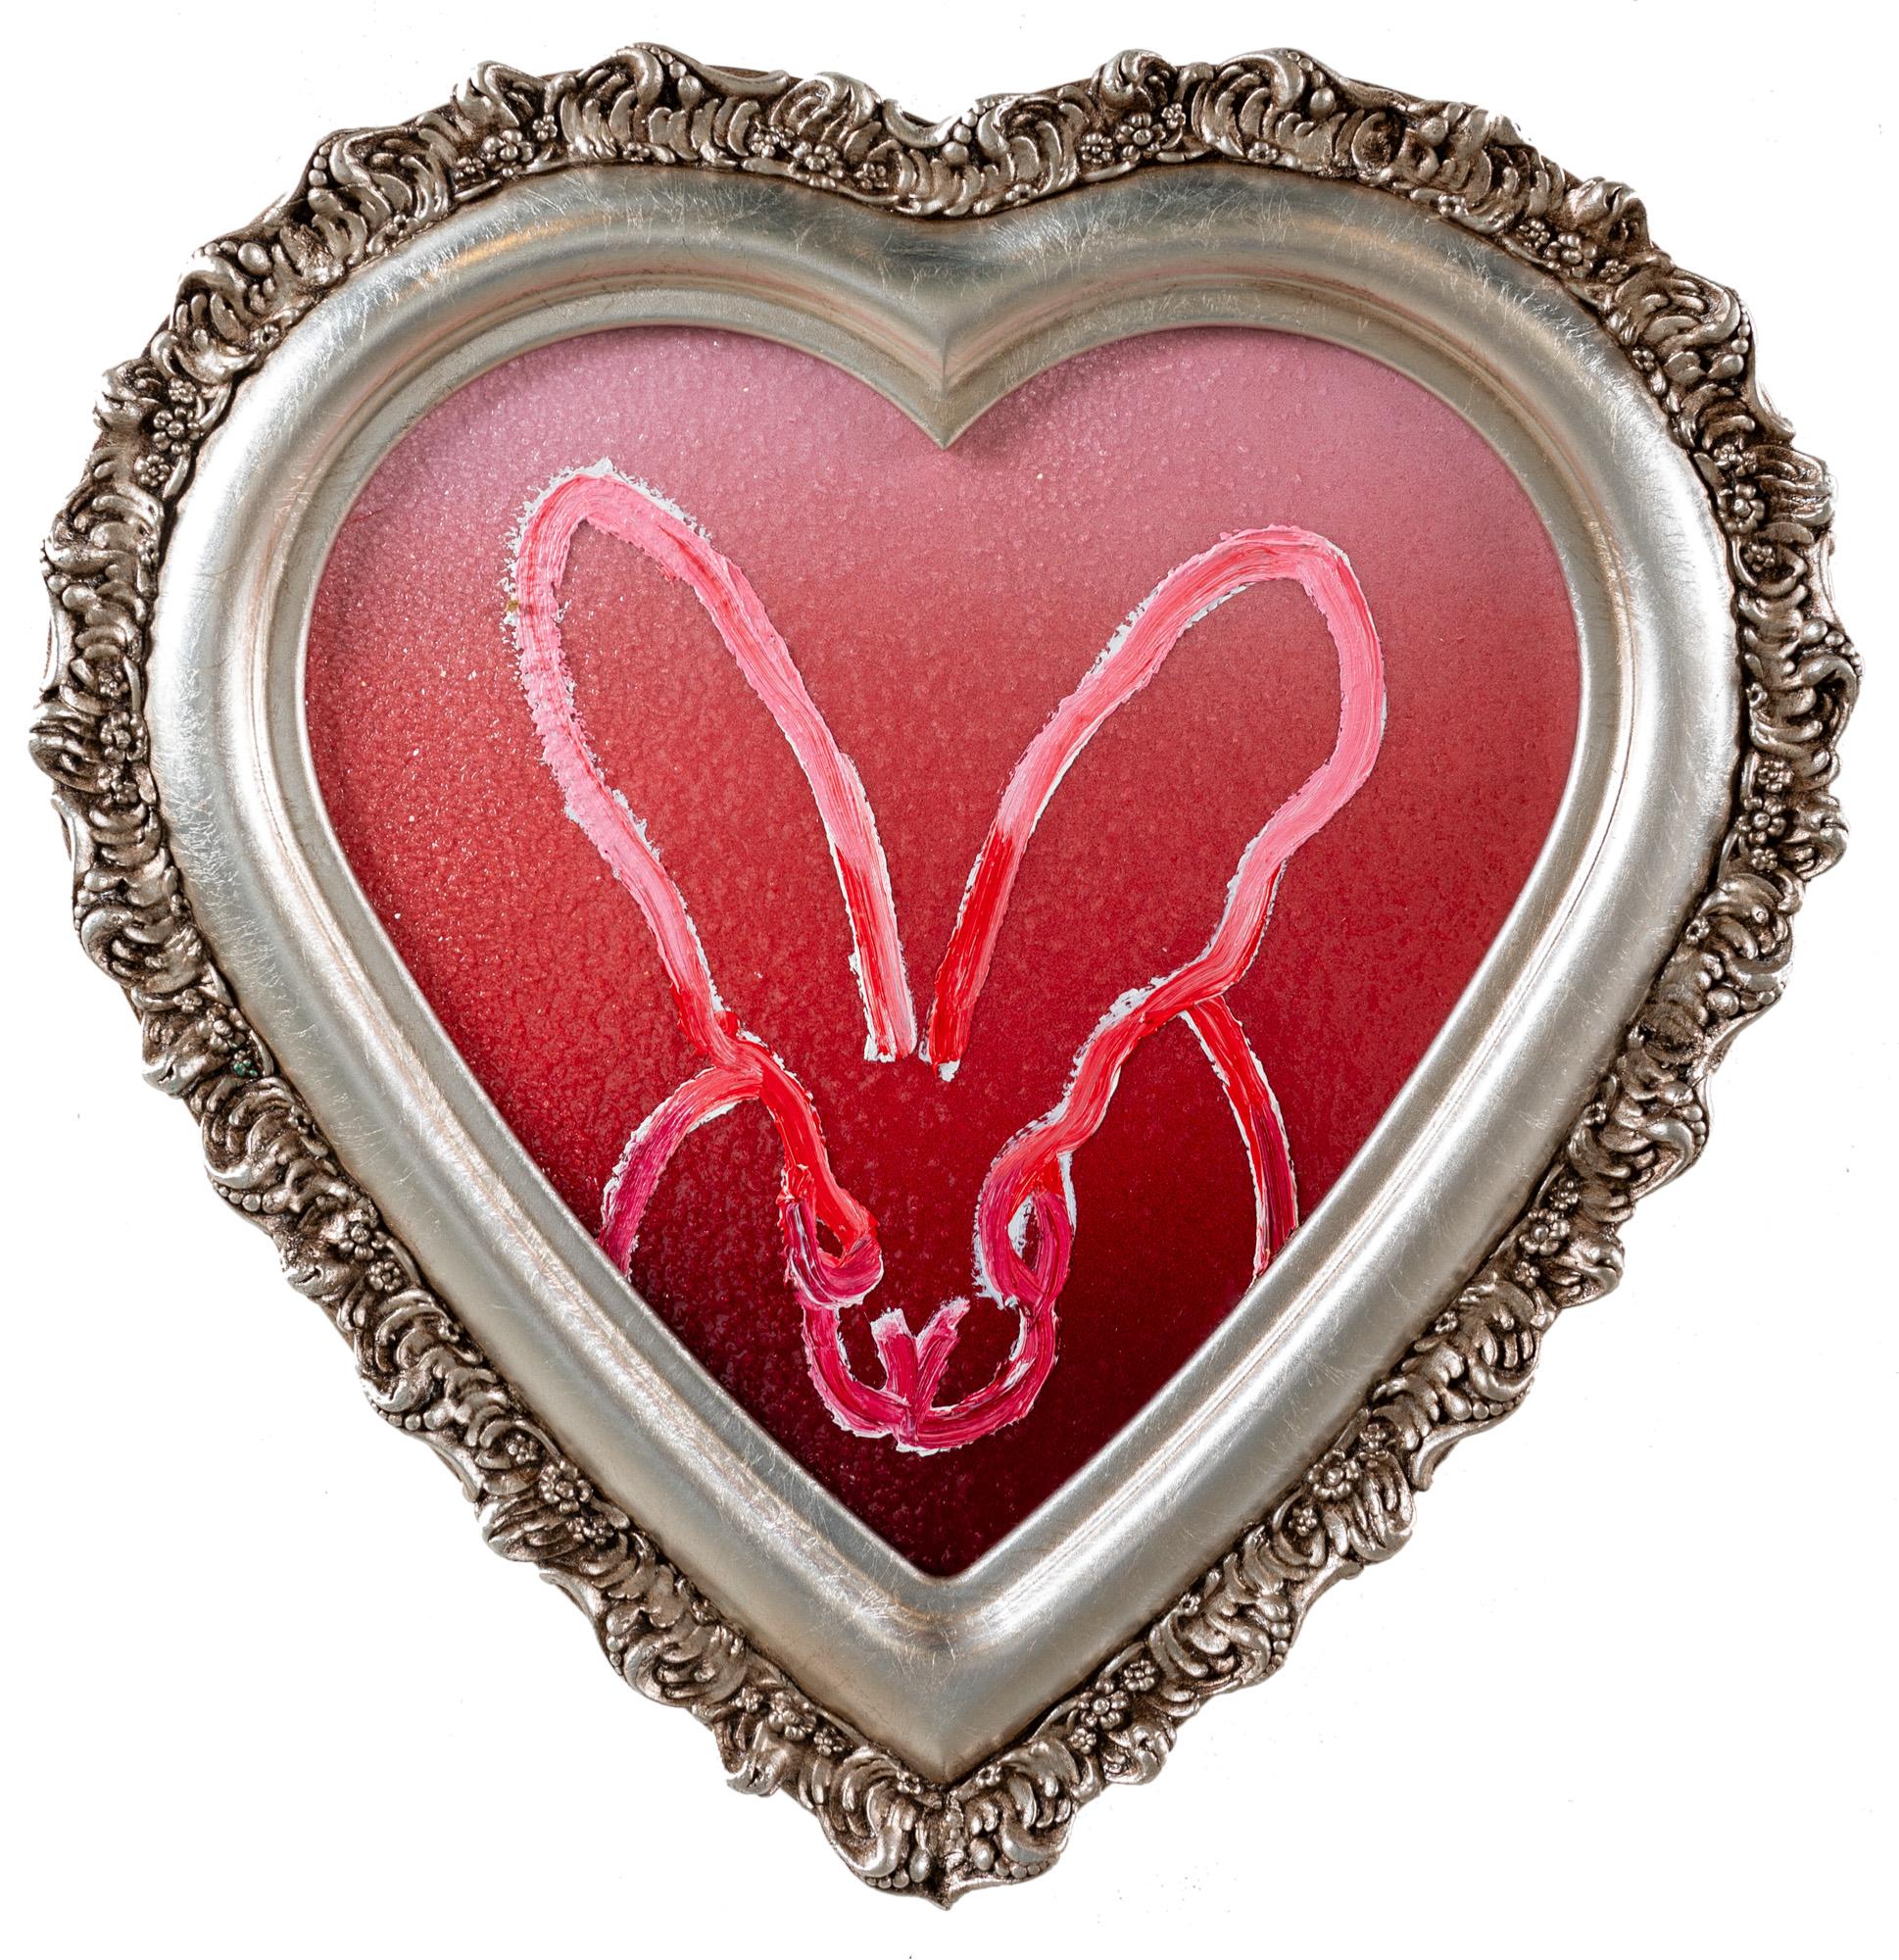 "Savannah" is a framed acrylic and oil painting on wood by Hunt Slonem, depicting a bunny atop an ombre Diamond Dust background. 

This piece is finished in an antique heart-shaped frame, which has been hand-selected by the artist for this painting.